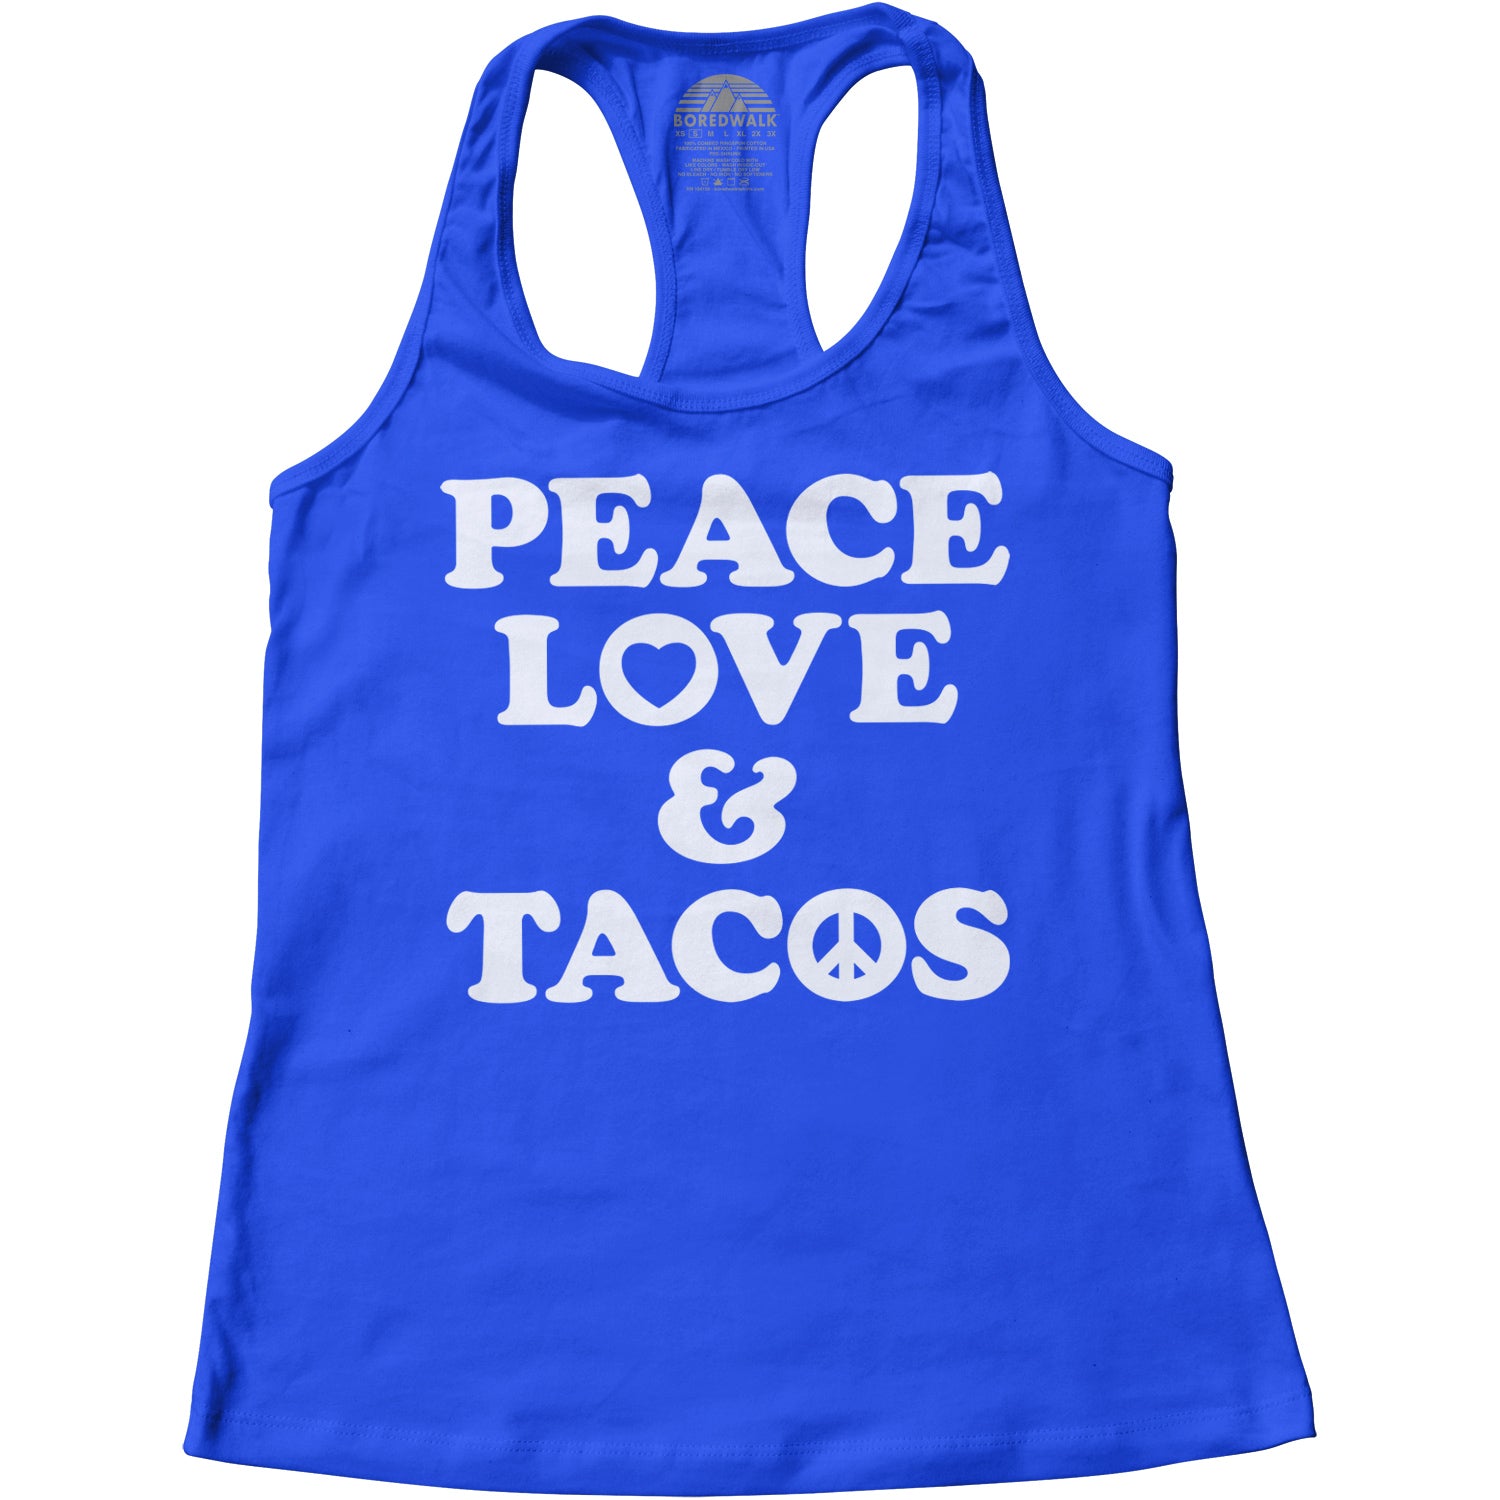 Women's Peace Love and Tacos Racerback Tank Top